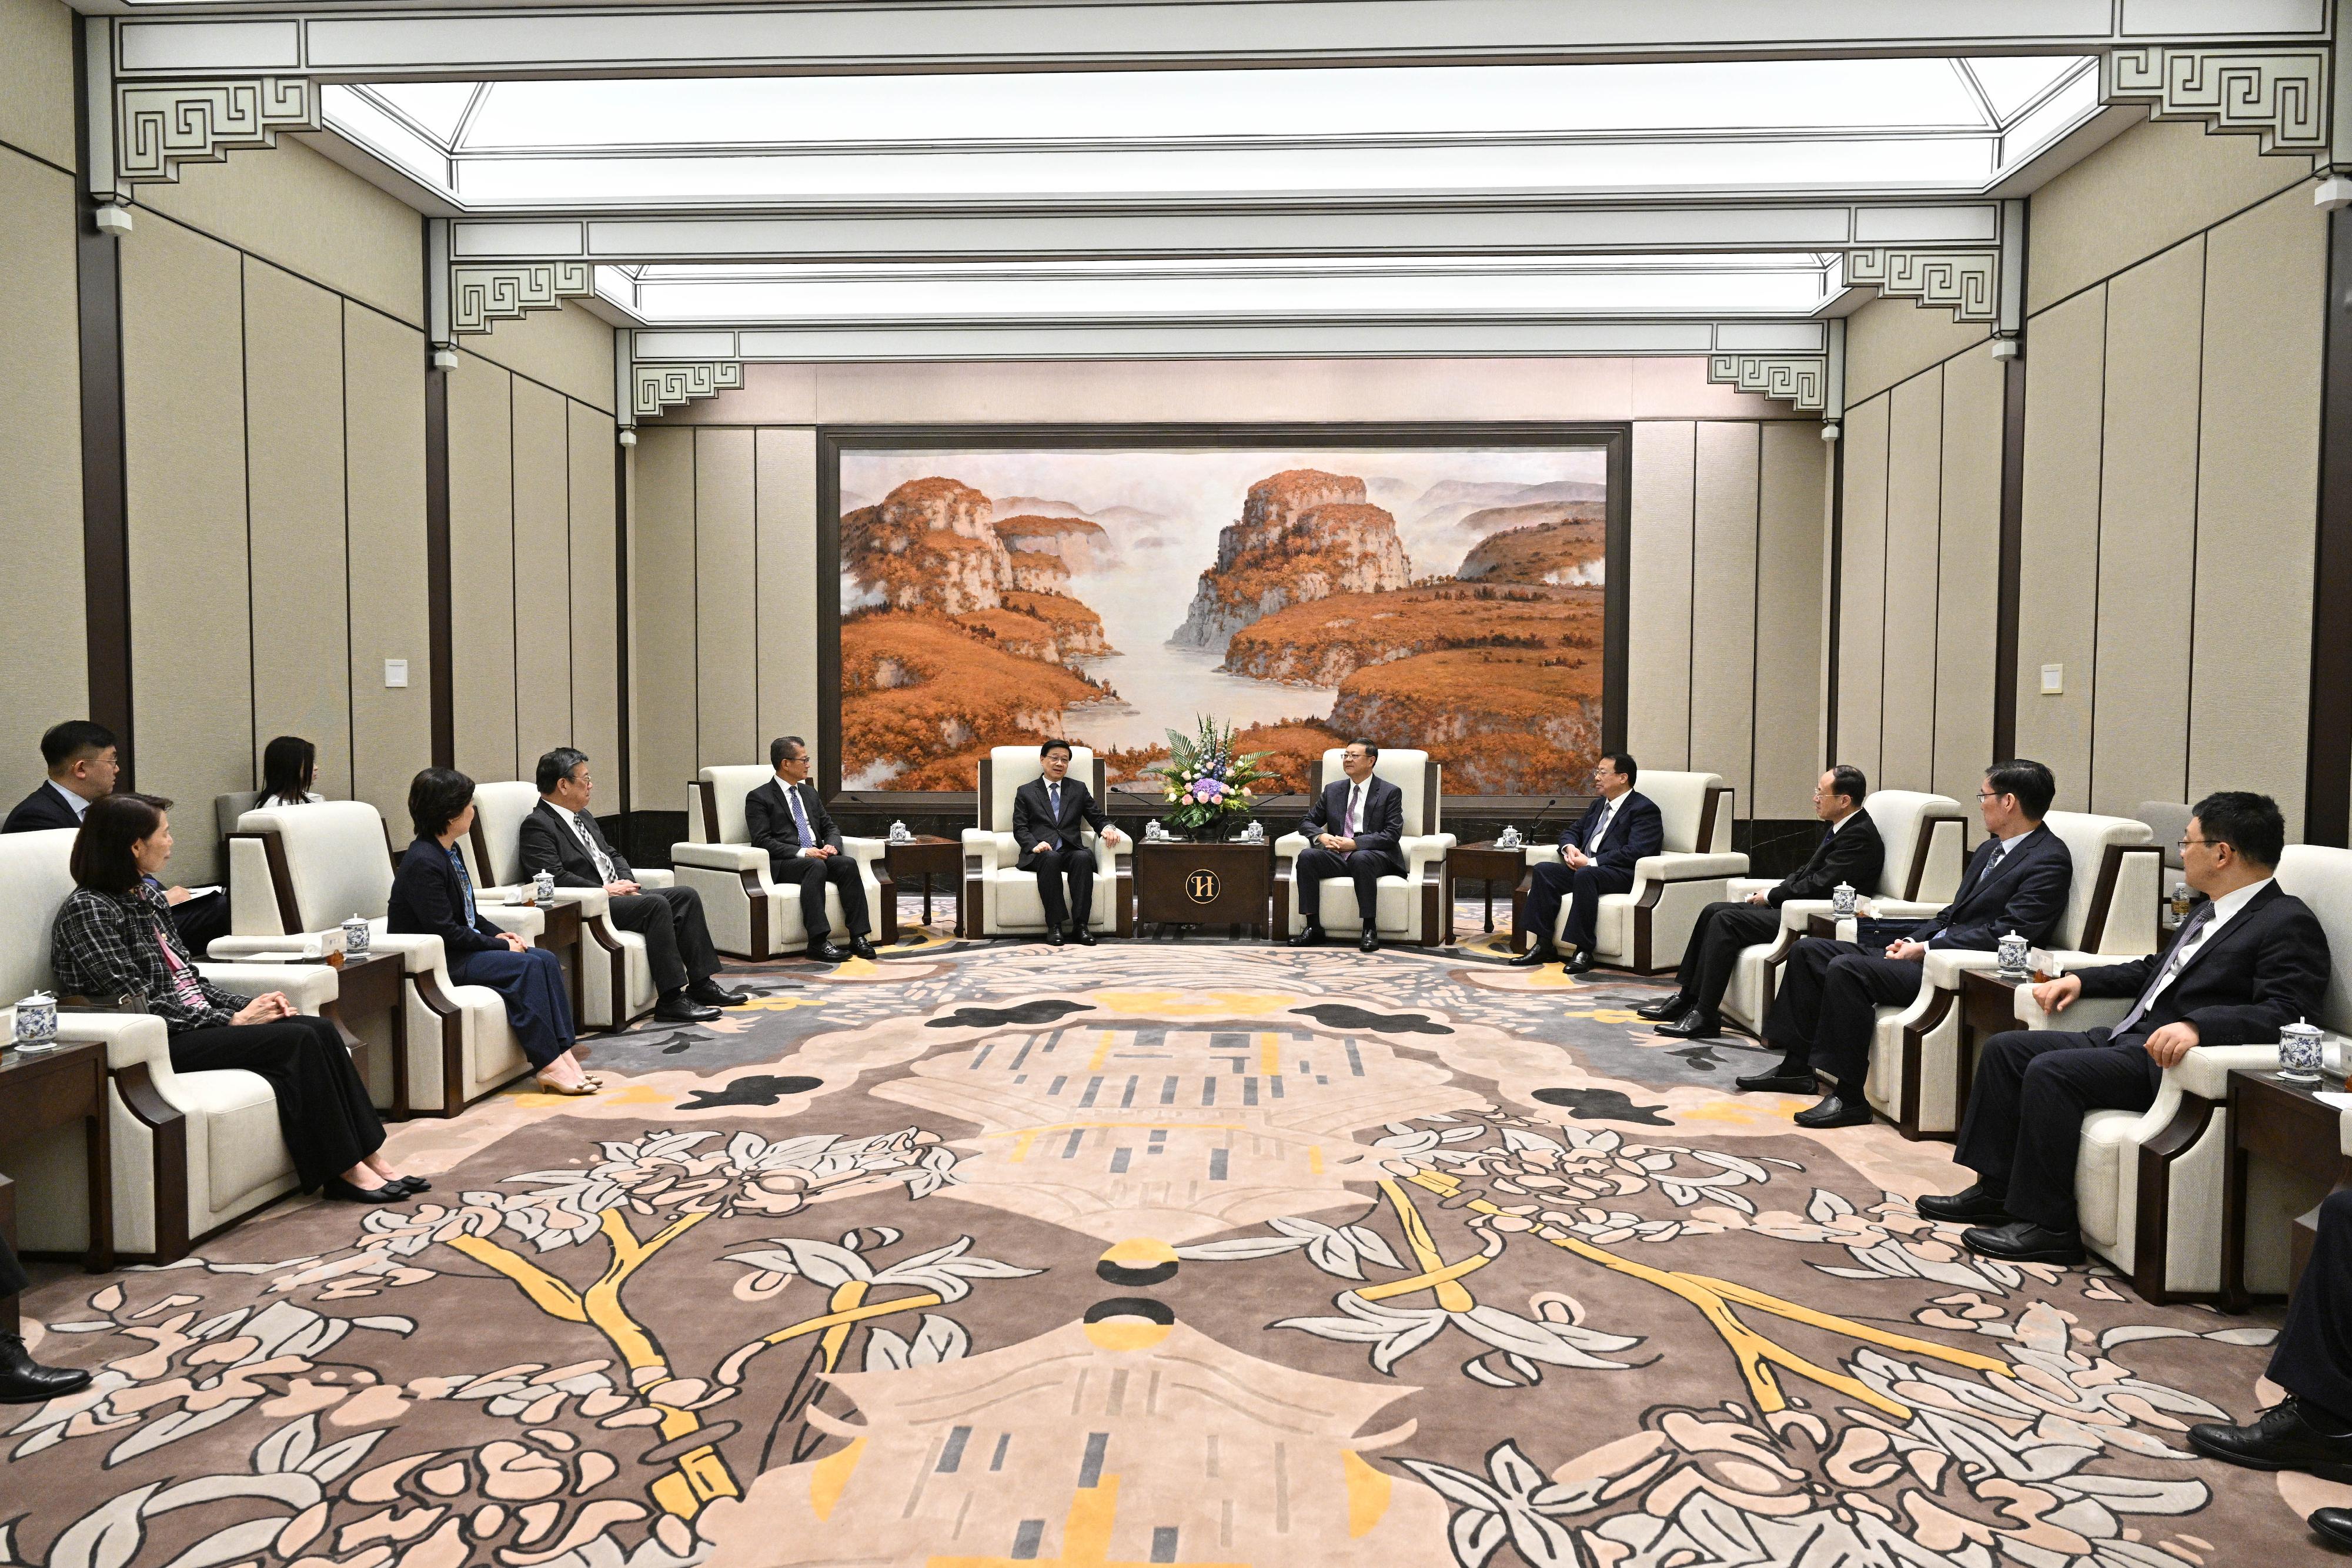 The Chief Executive, Mr John Lee (fifth left), meets with the Secretary of the CPC Shanghai Municipal Committee, Mr Chen Jining (fifth right), and the Mayor of Shanghai, Mr Gong Zheng (fourth right) in Shanghai today (November 4). The Financial Secretary, Mr Paul Chan (fourth left); the Secretary for Commerce and Economic Development, Mr Algernon Yau (third left); the Secretary for Education, Dr Choi Yuk-lin (second left); and the Director of the Chief Executive's Office, Ms Carol Yip (first left) also attended.